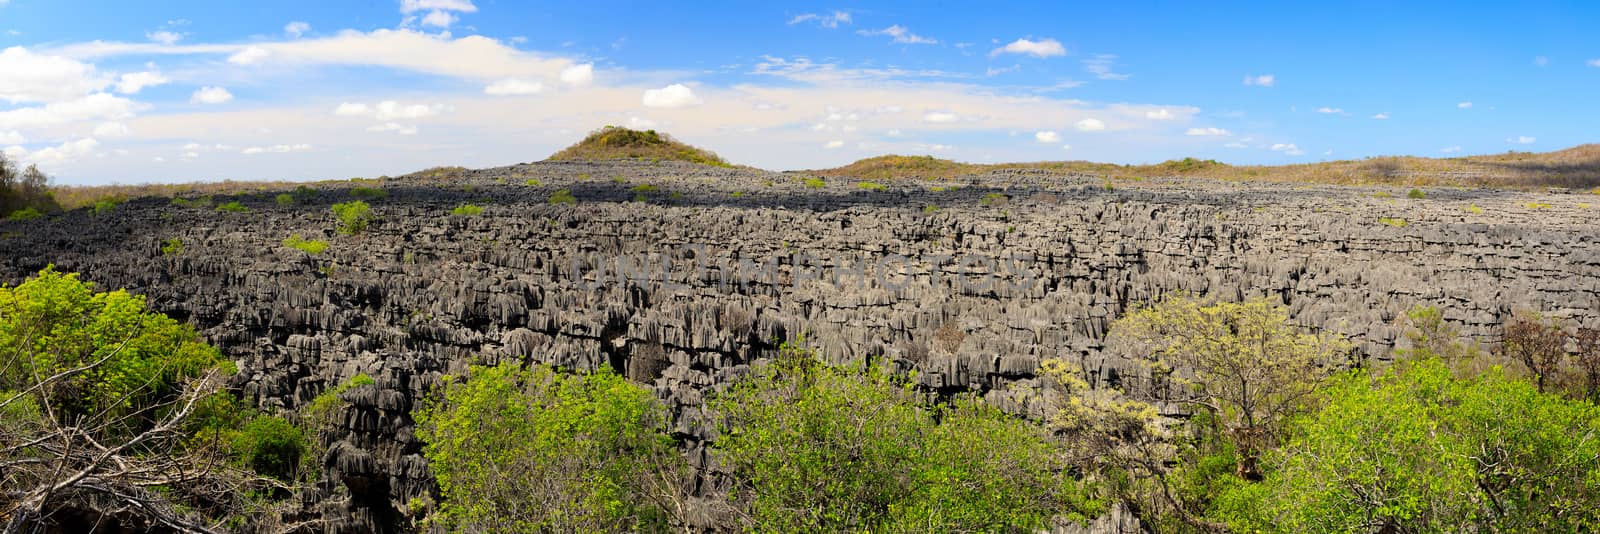 Curiously strange rock formations of fantastically eroded limestone spires, known as Tsingy in amazing National Park Ankarana, Madagascar wilderness